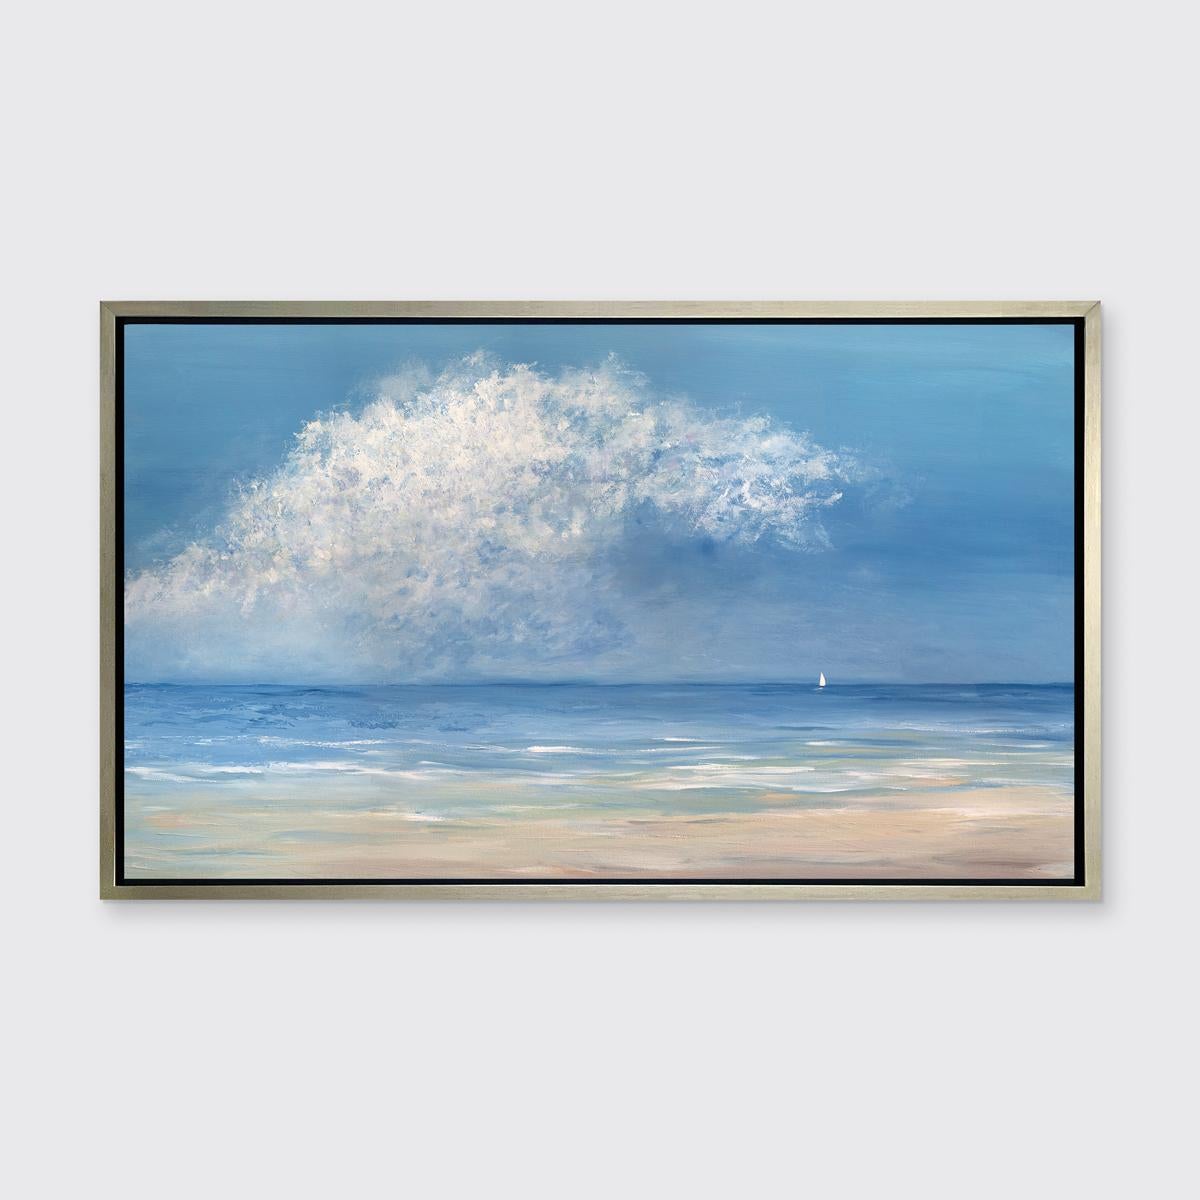 S. Cora Aldo Landscape Print - "On the Wind, " Framed Limited Edition Giclee Print, 18" x 30"